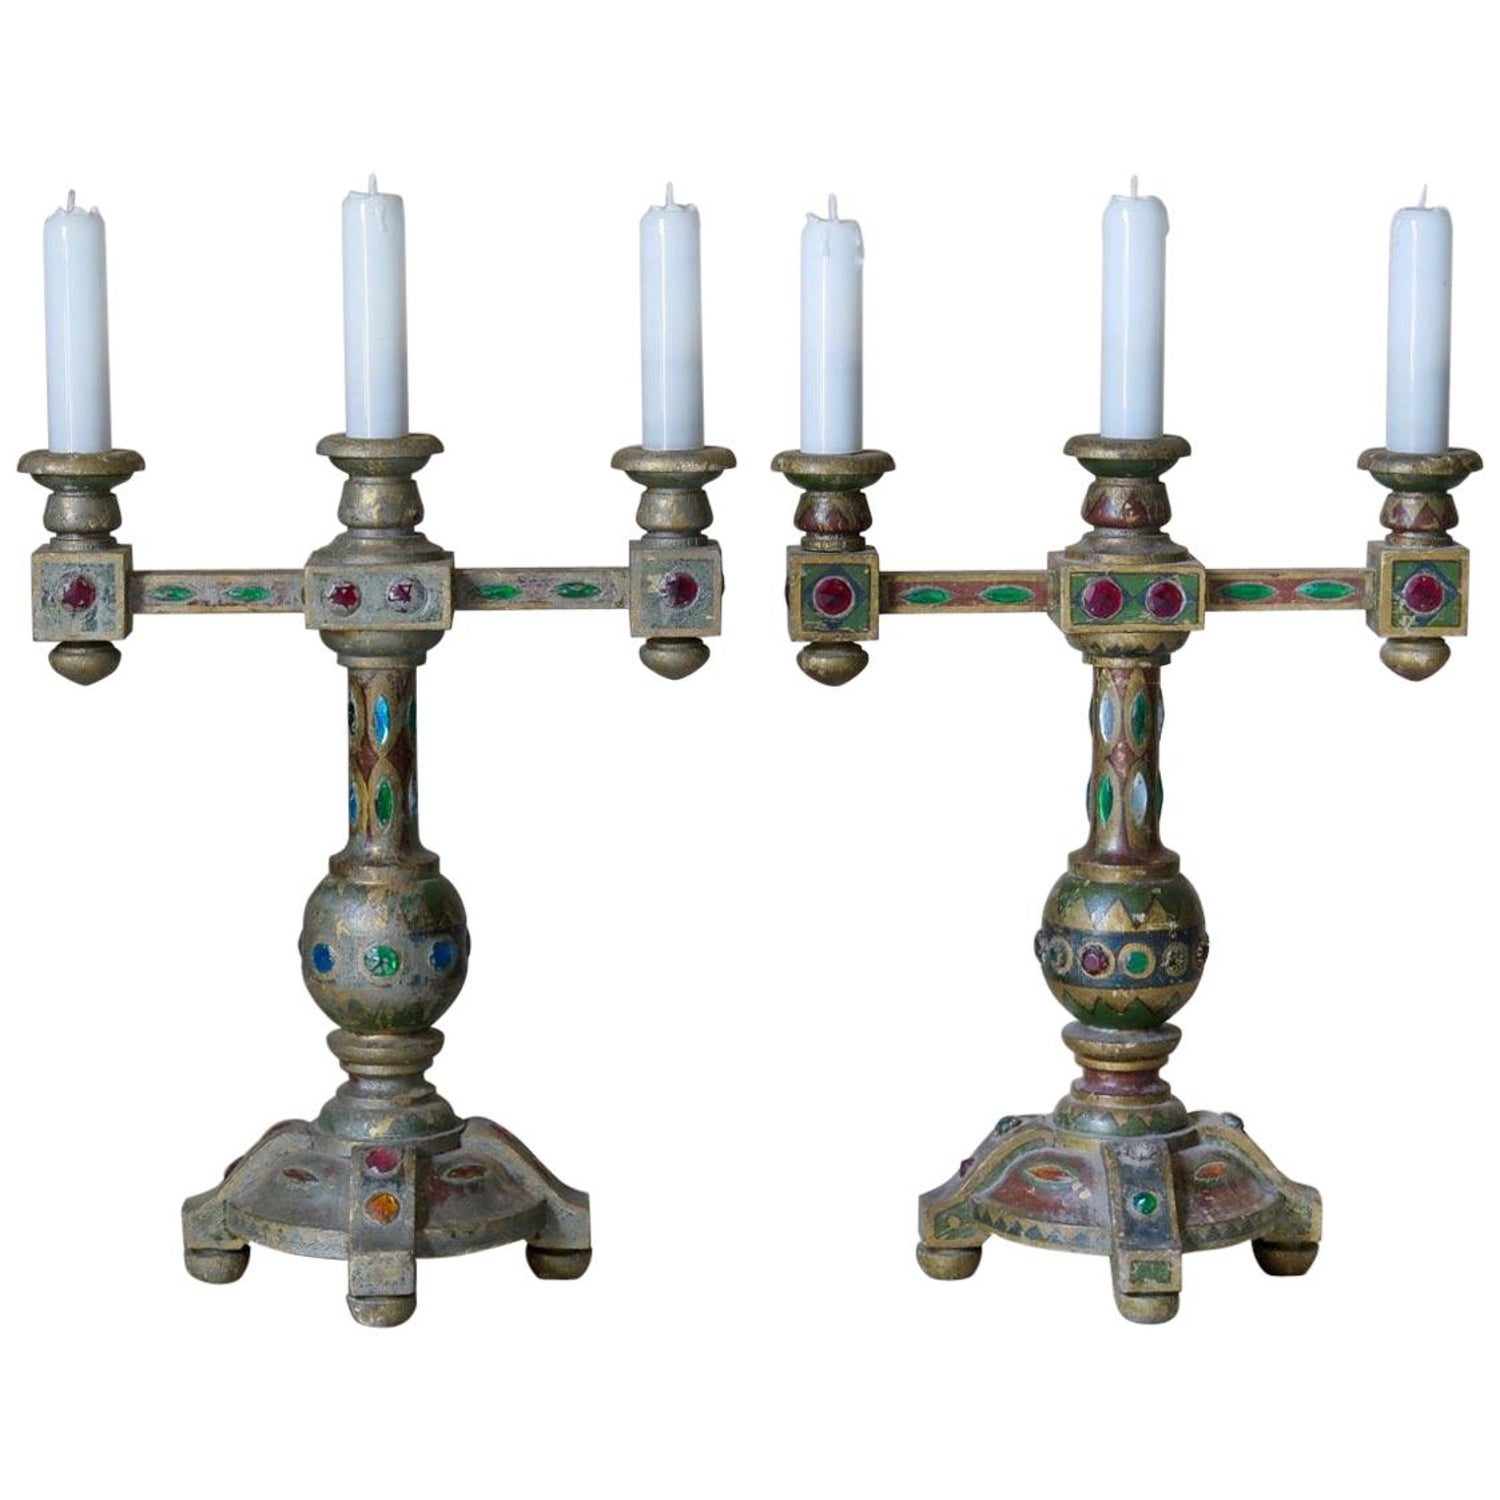 Sold at Auction: Pair of French Style Artichoke Table Lamps